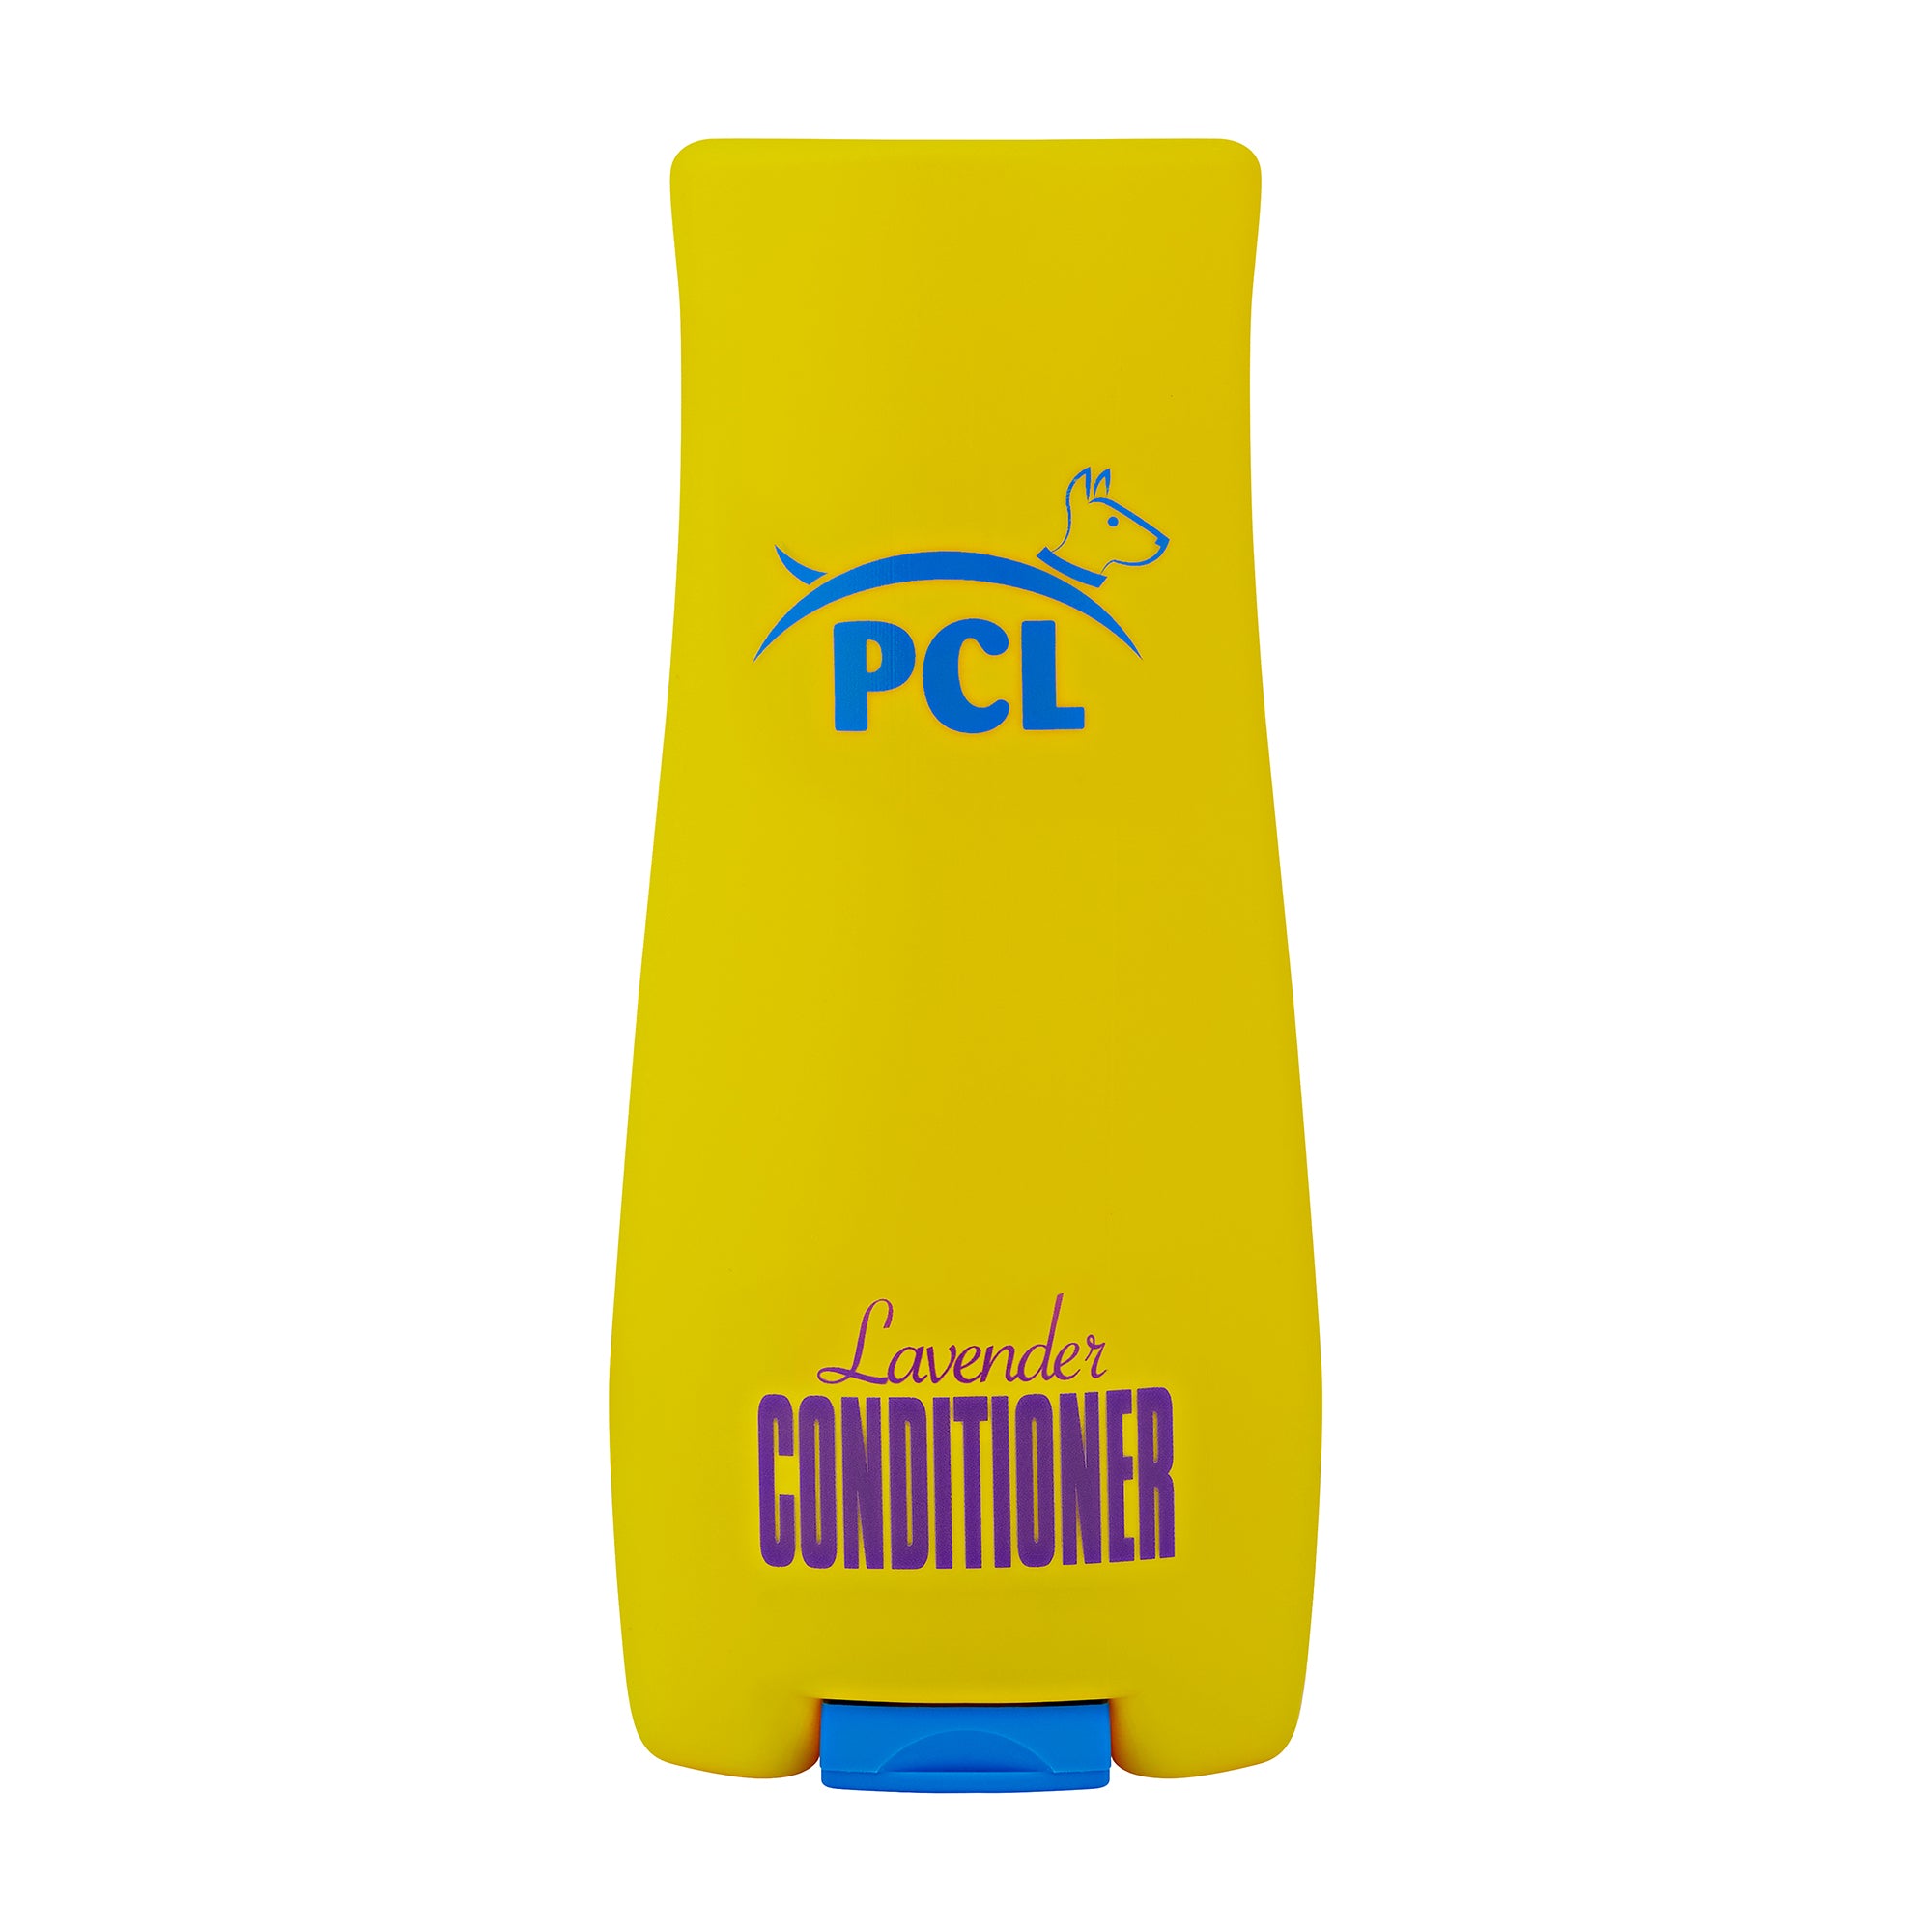 PCL Lavender Conditioner - K9 Competition